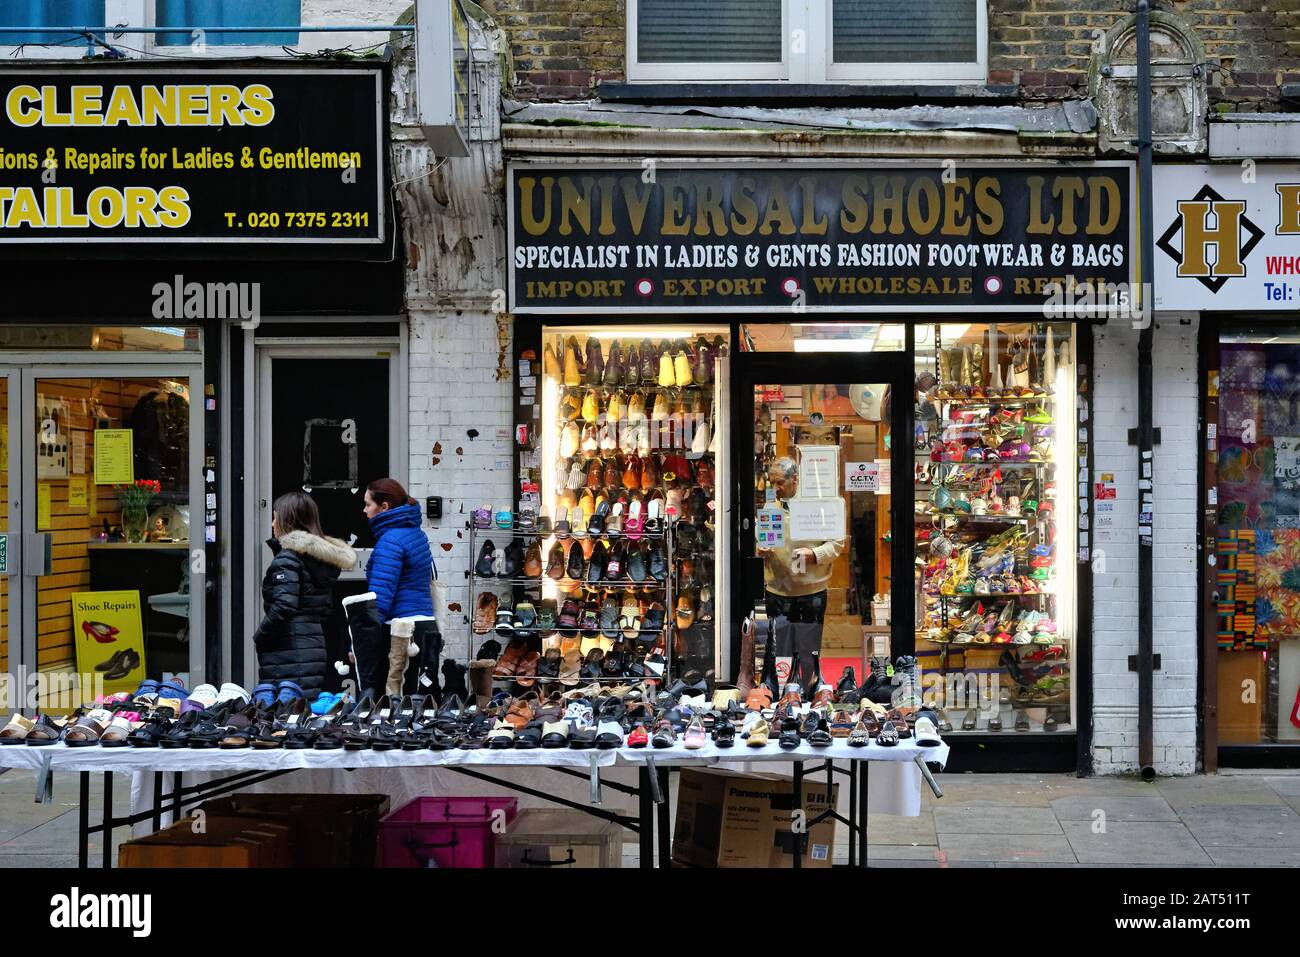 The front window display of an old style shoe shop on Wentworth Street Whitechapel East London England UK Stock Photo